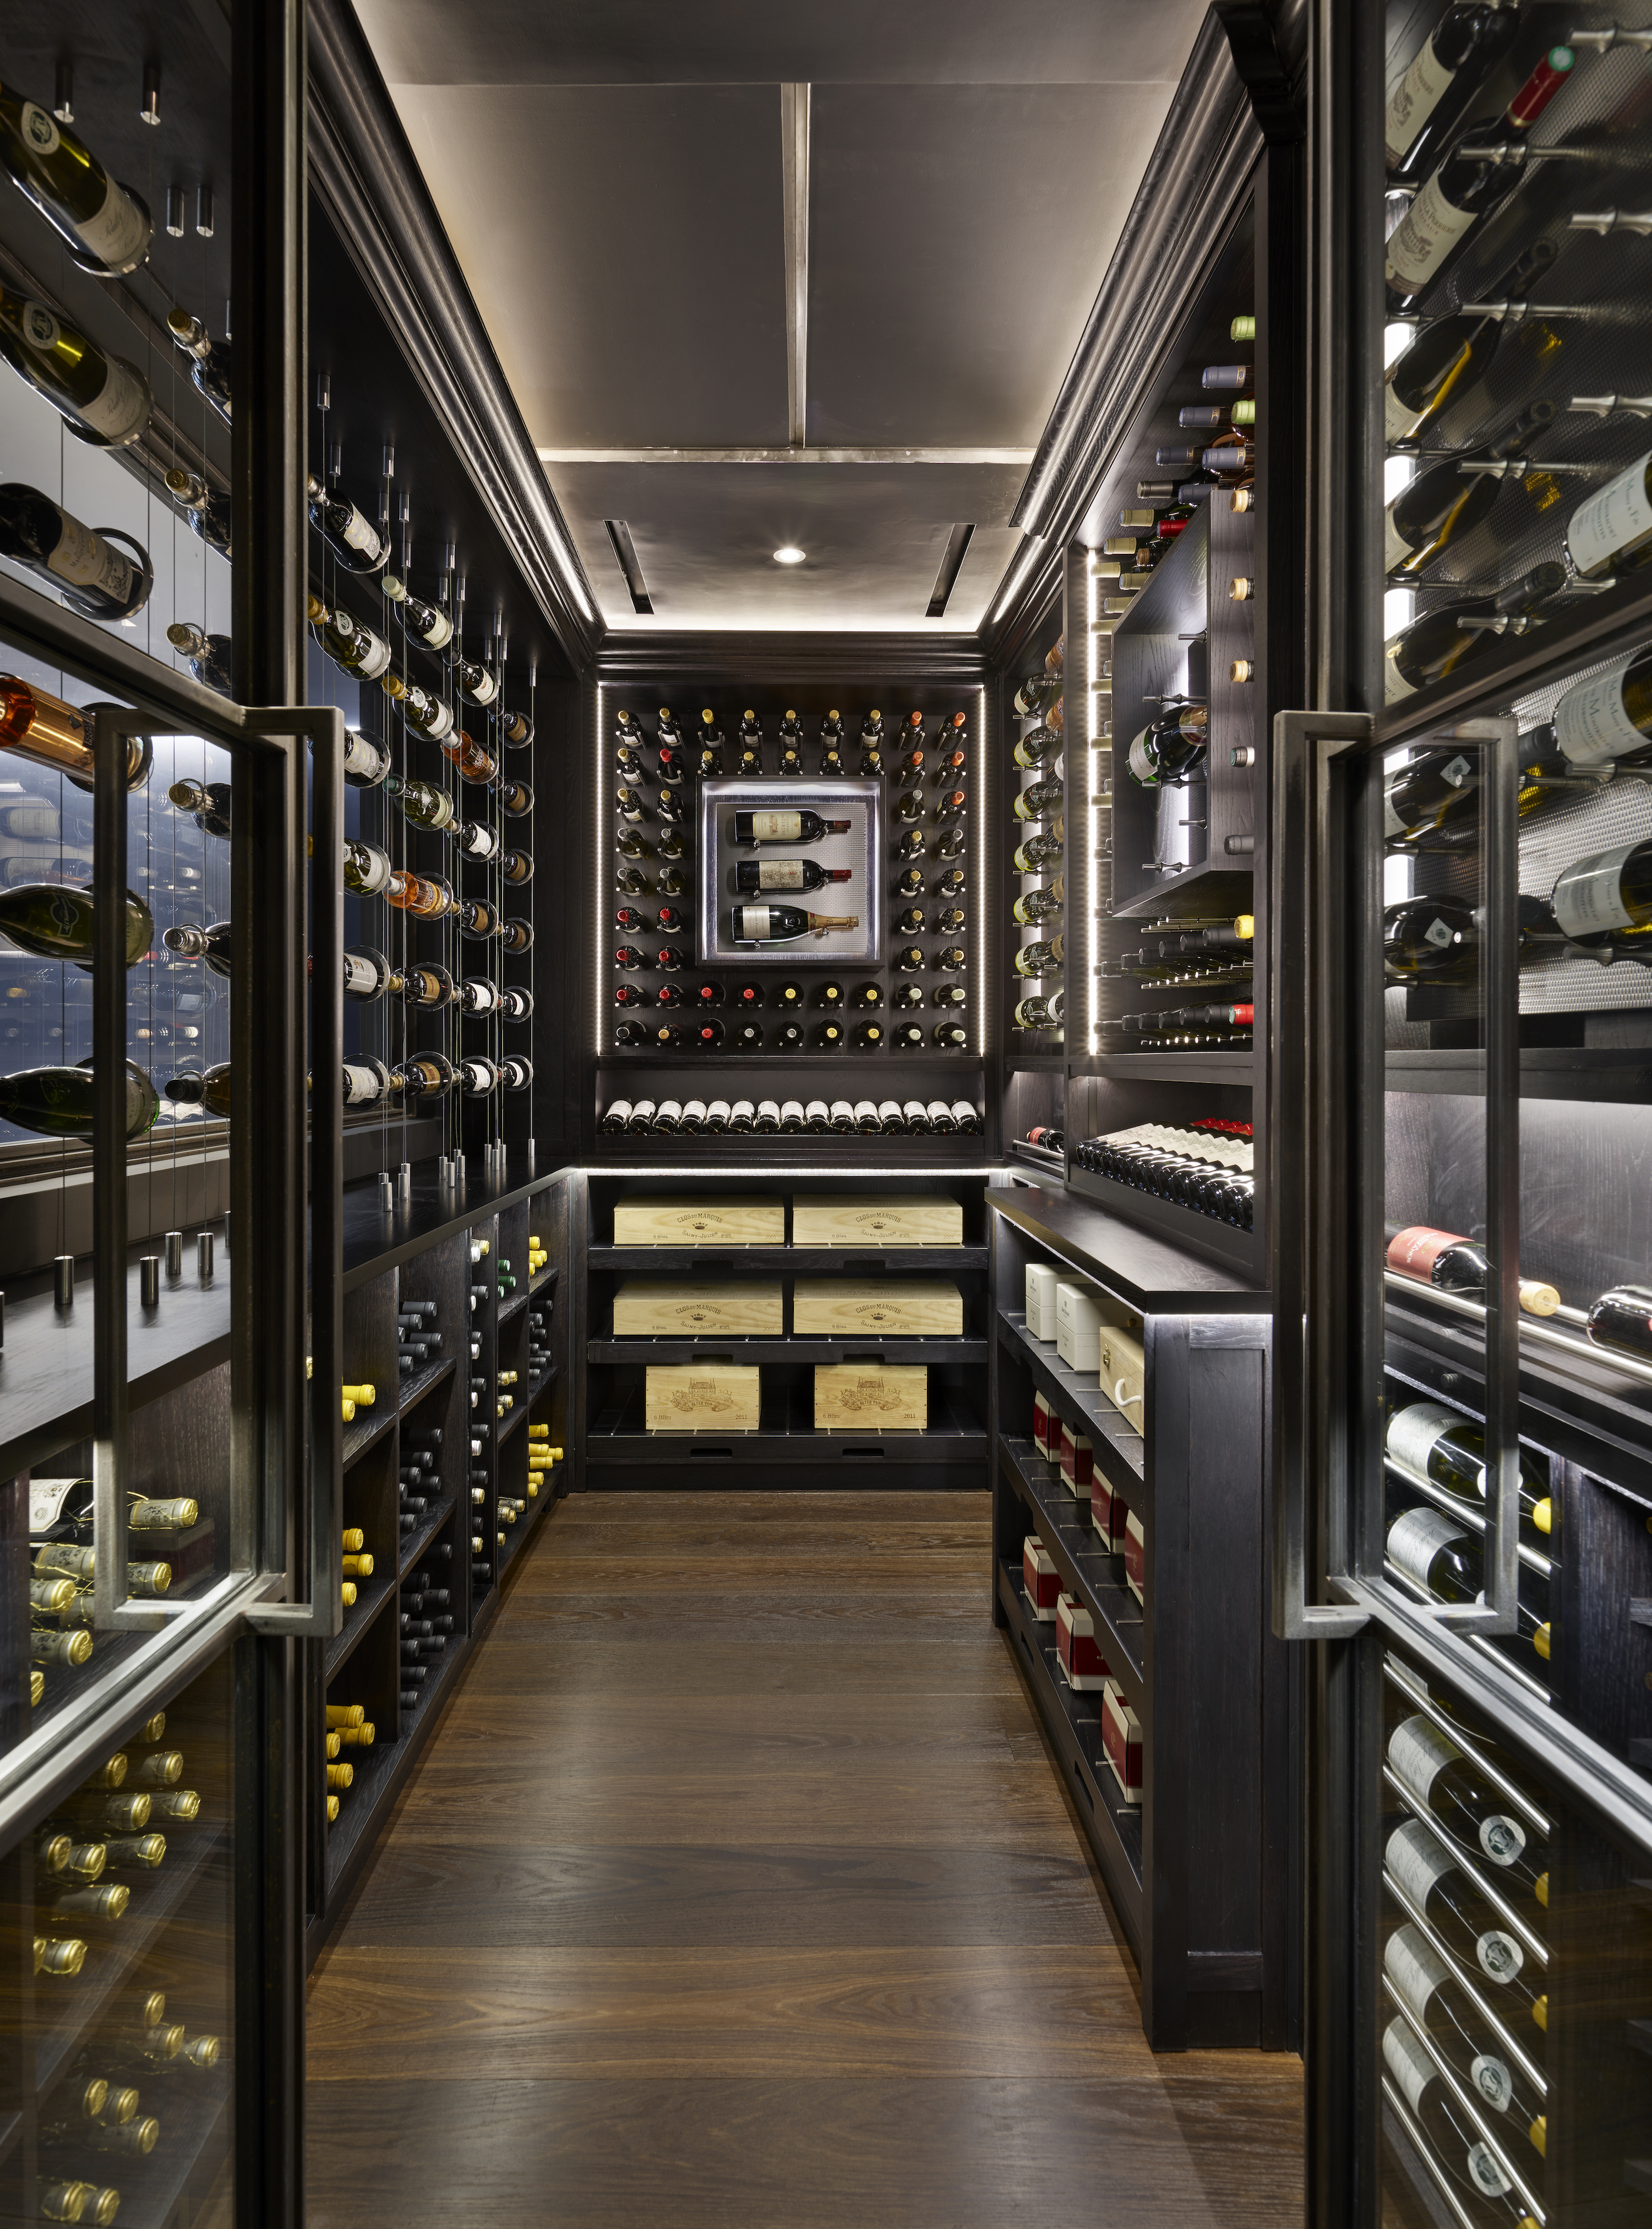 Spiral Cellars launches new service for your wine collection